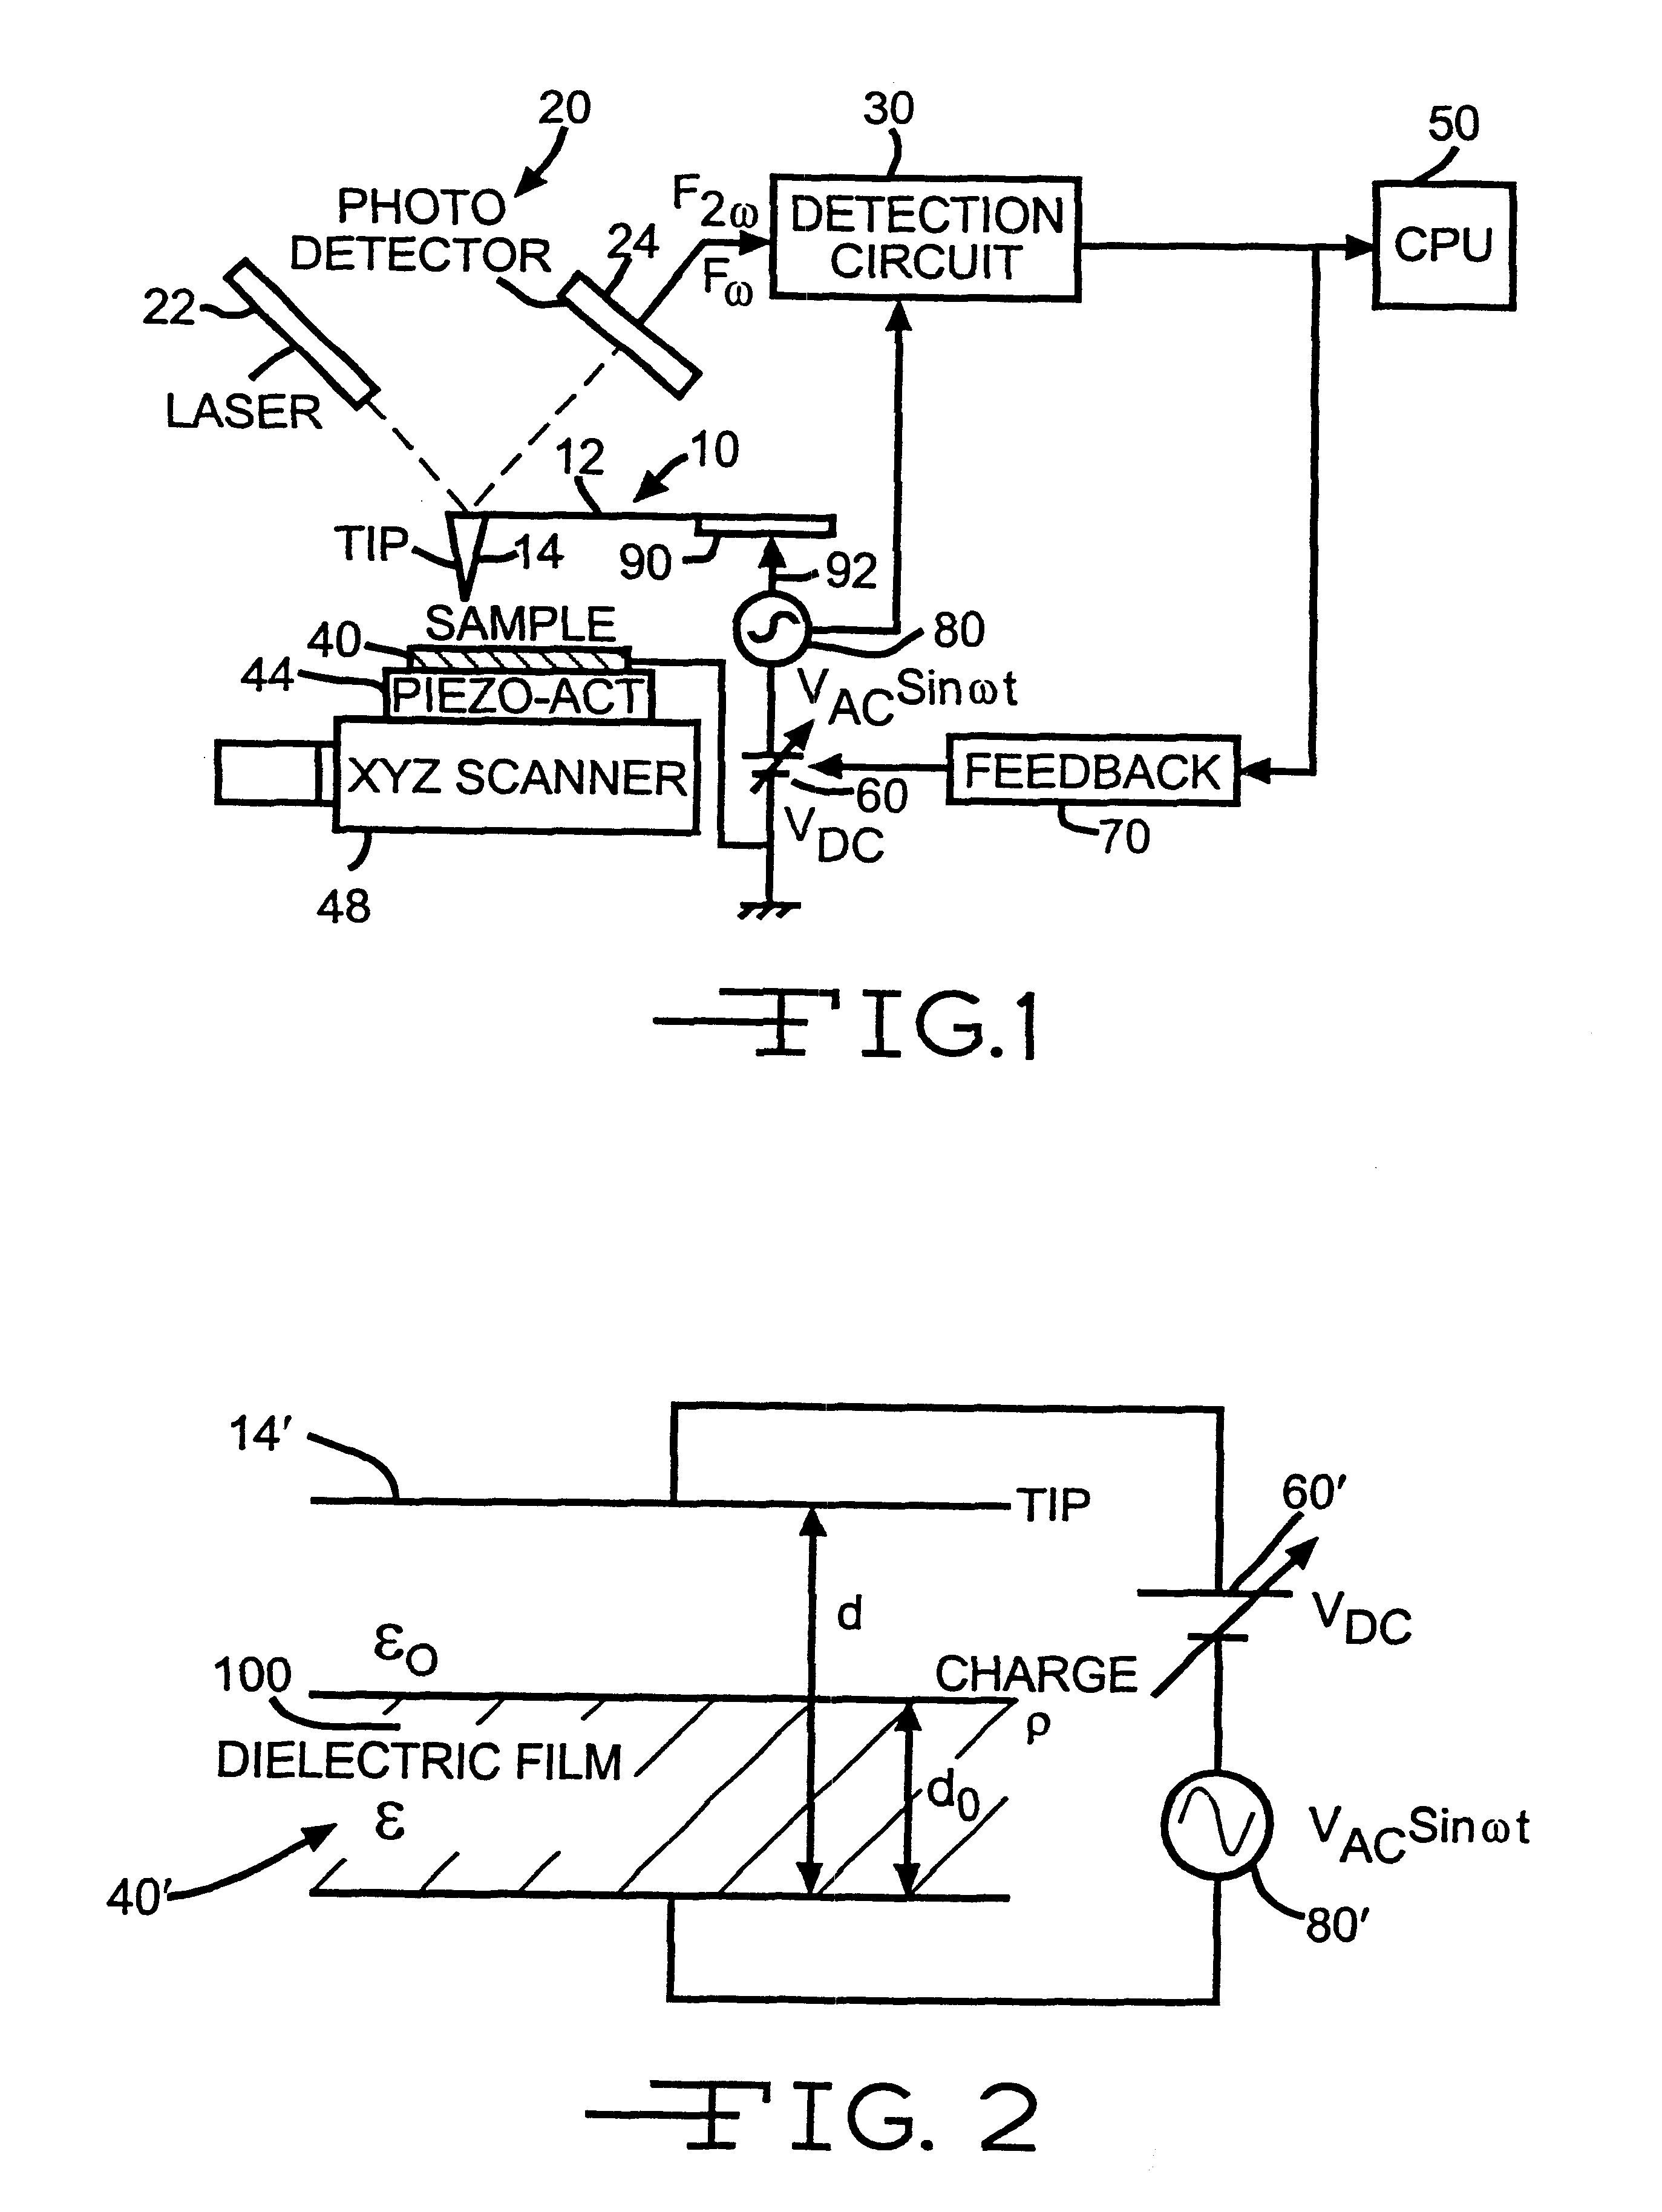 Electrostatic force detector with cantilever and shield for an electrostatic force microscope